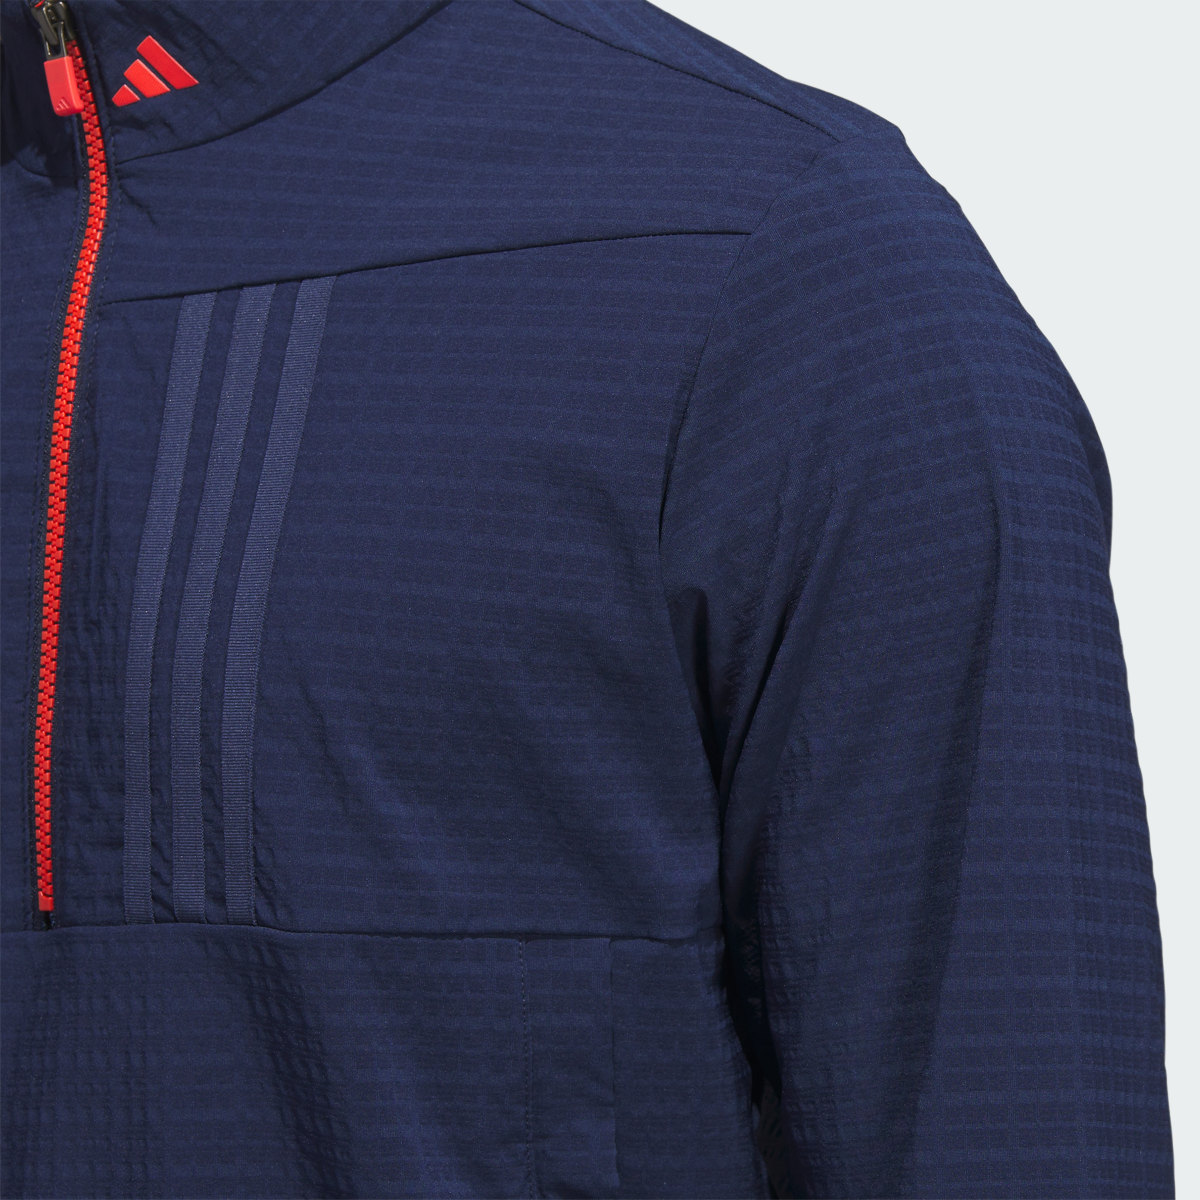 Adidas Ultimate365 Tour WIND.RDY Half-Zip Pullover. 6